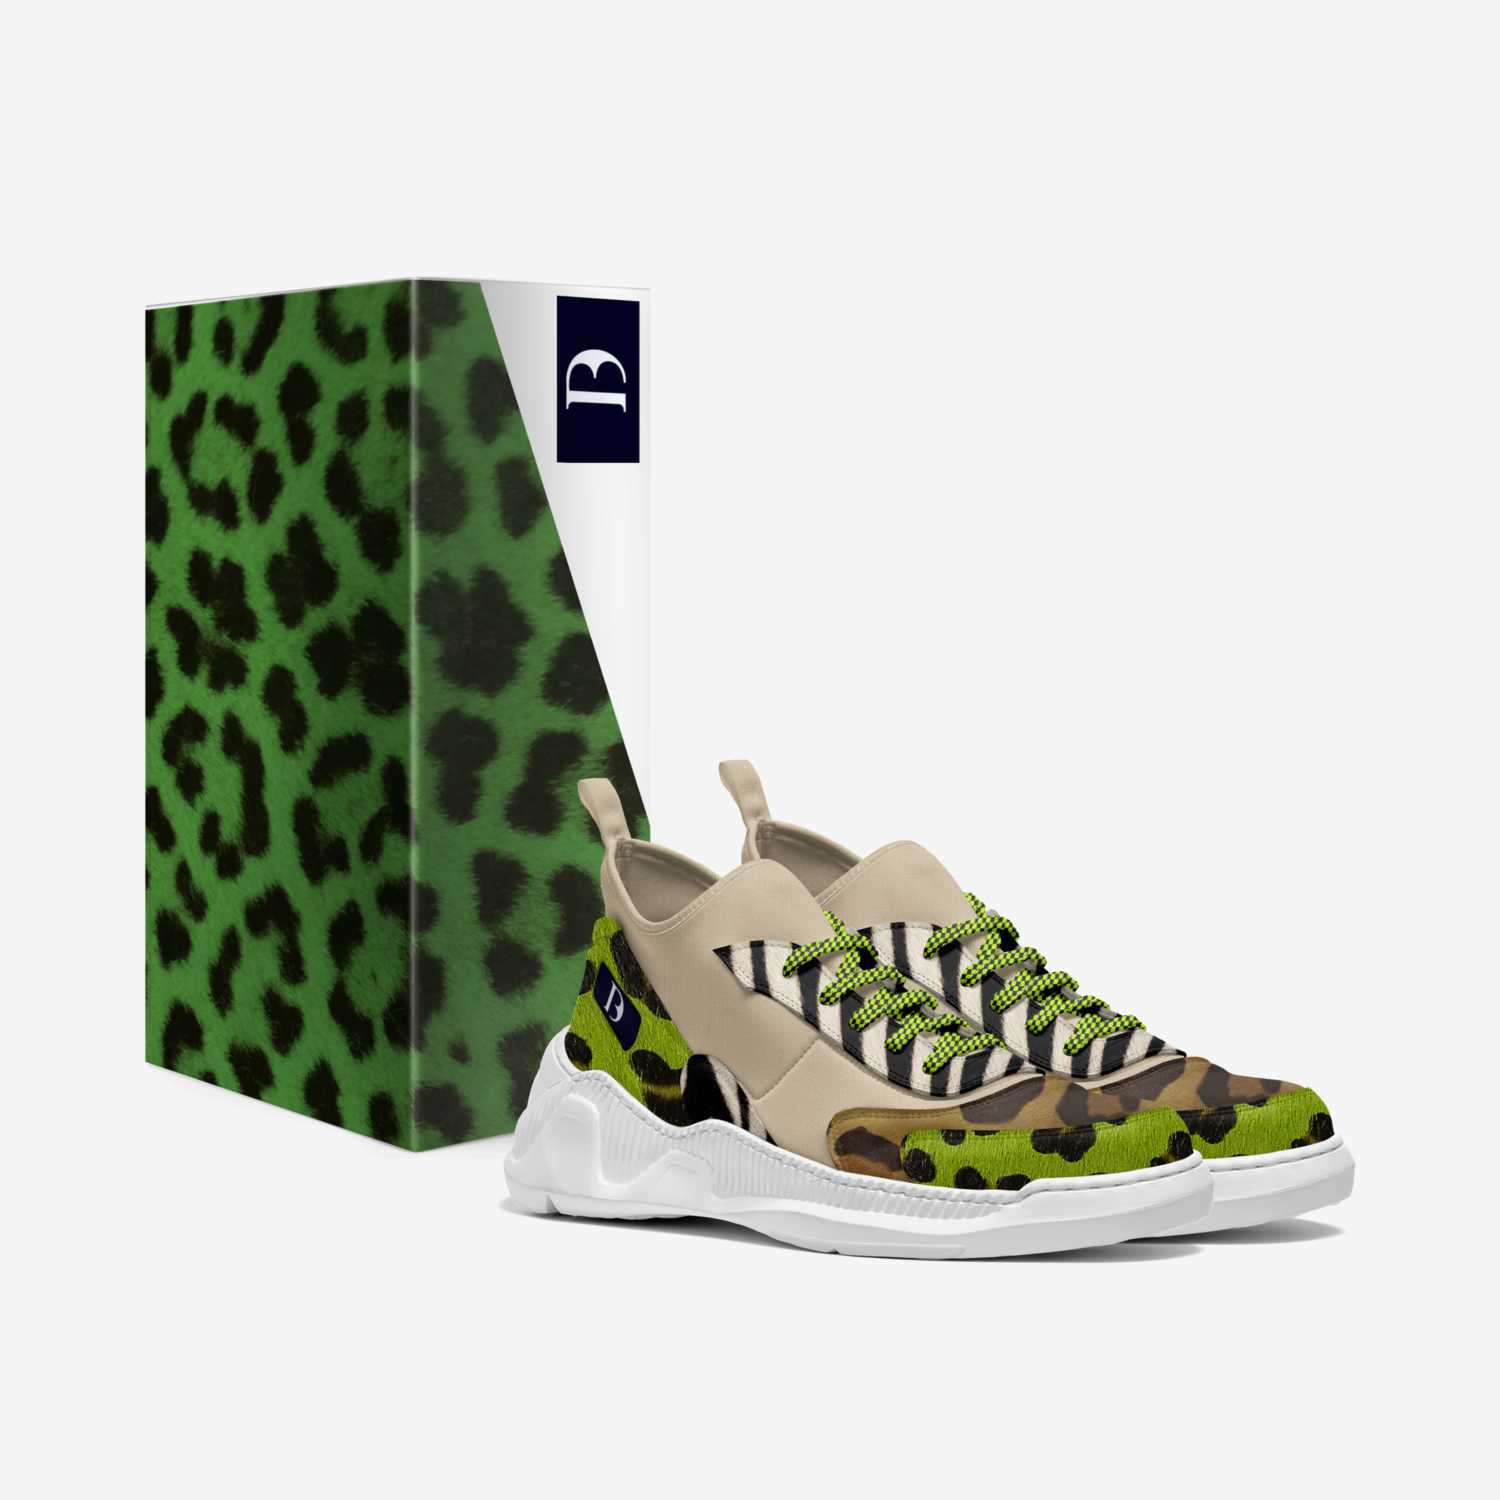 Epic Jungle custom made in Italy shoes by D’arri Burru | Box view